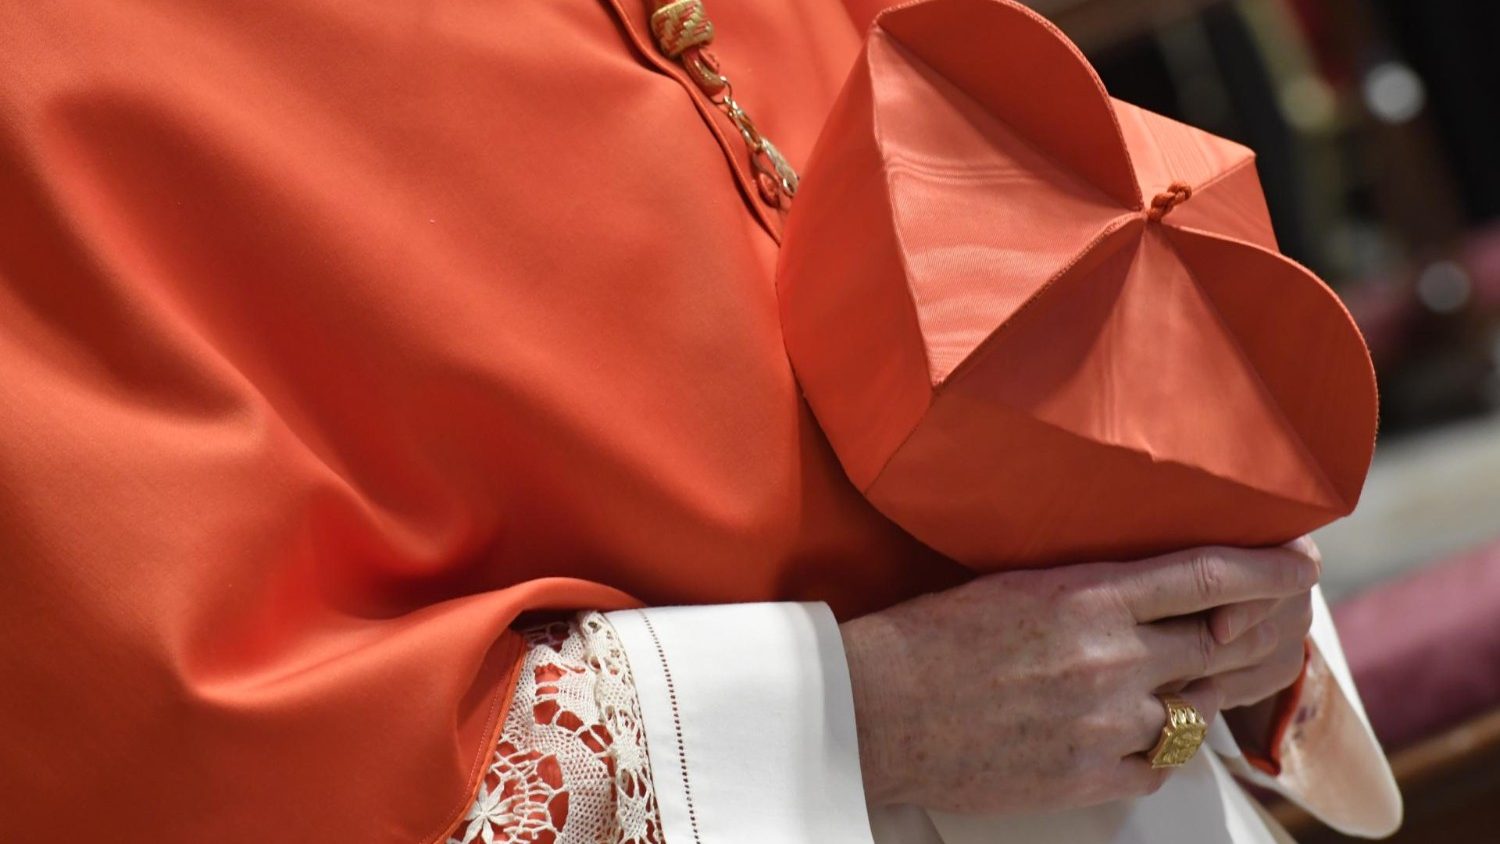 Constry August 27 to create 21 new cardinals